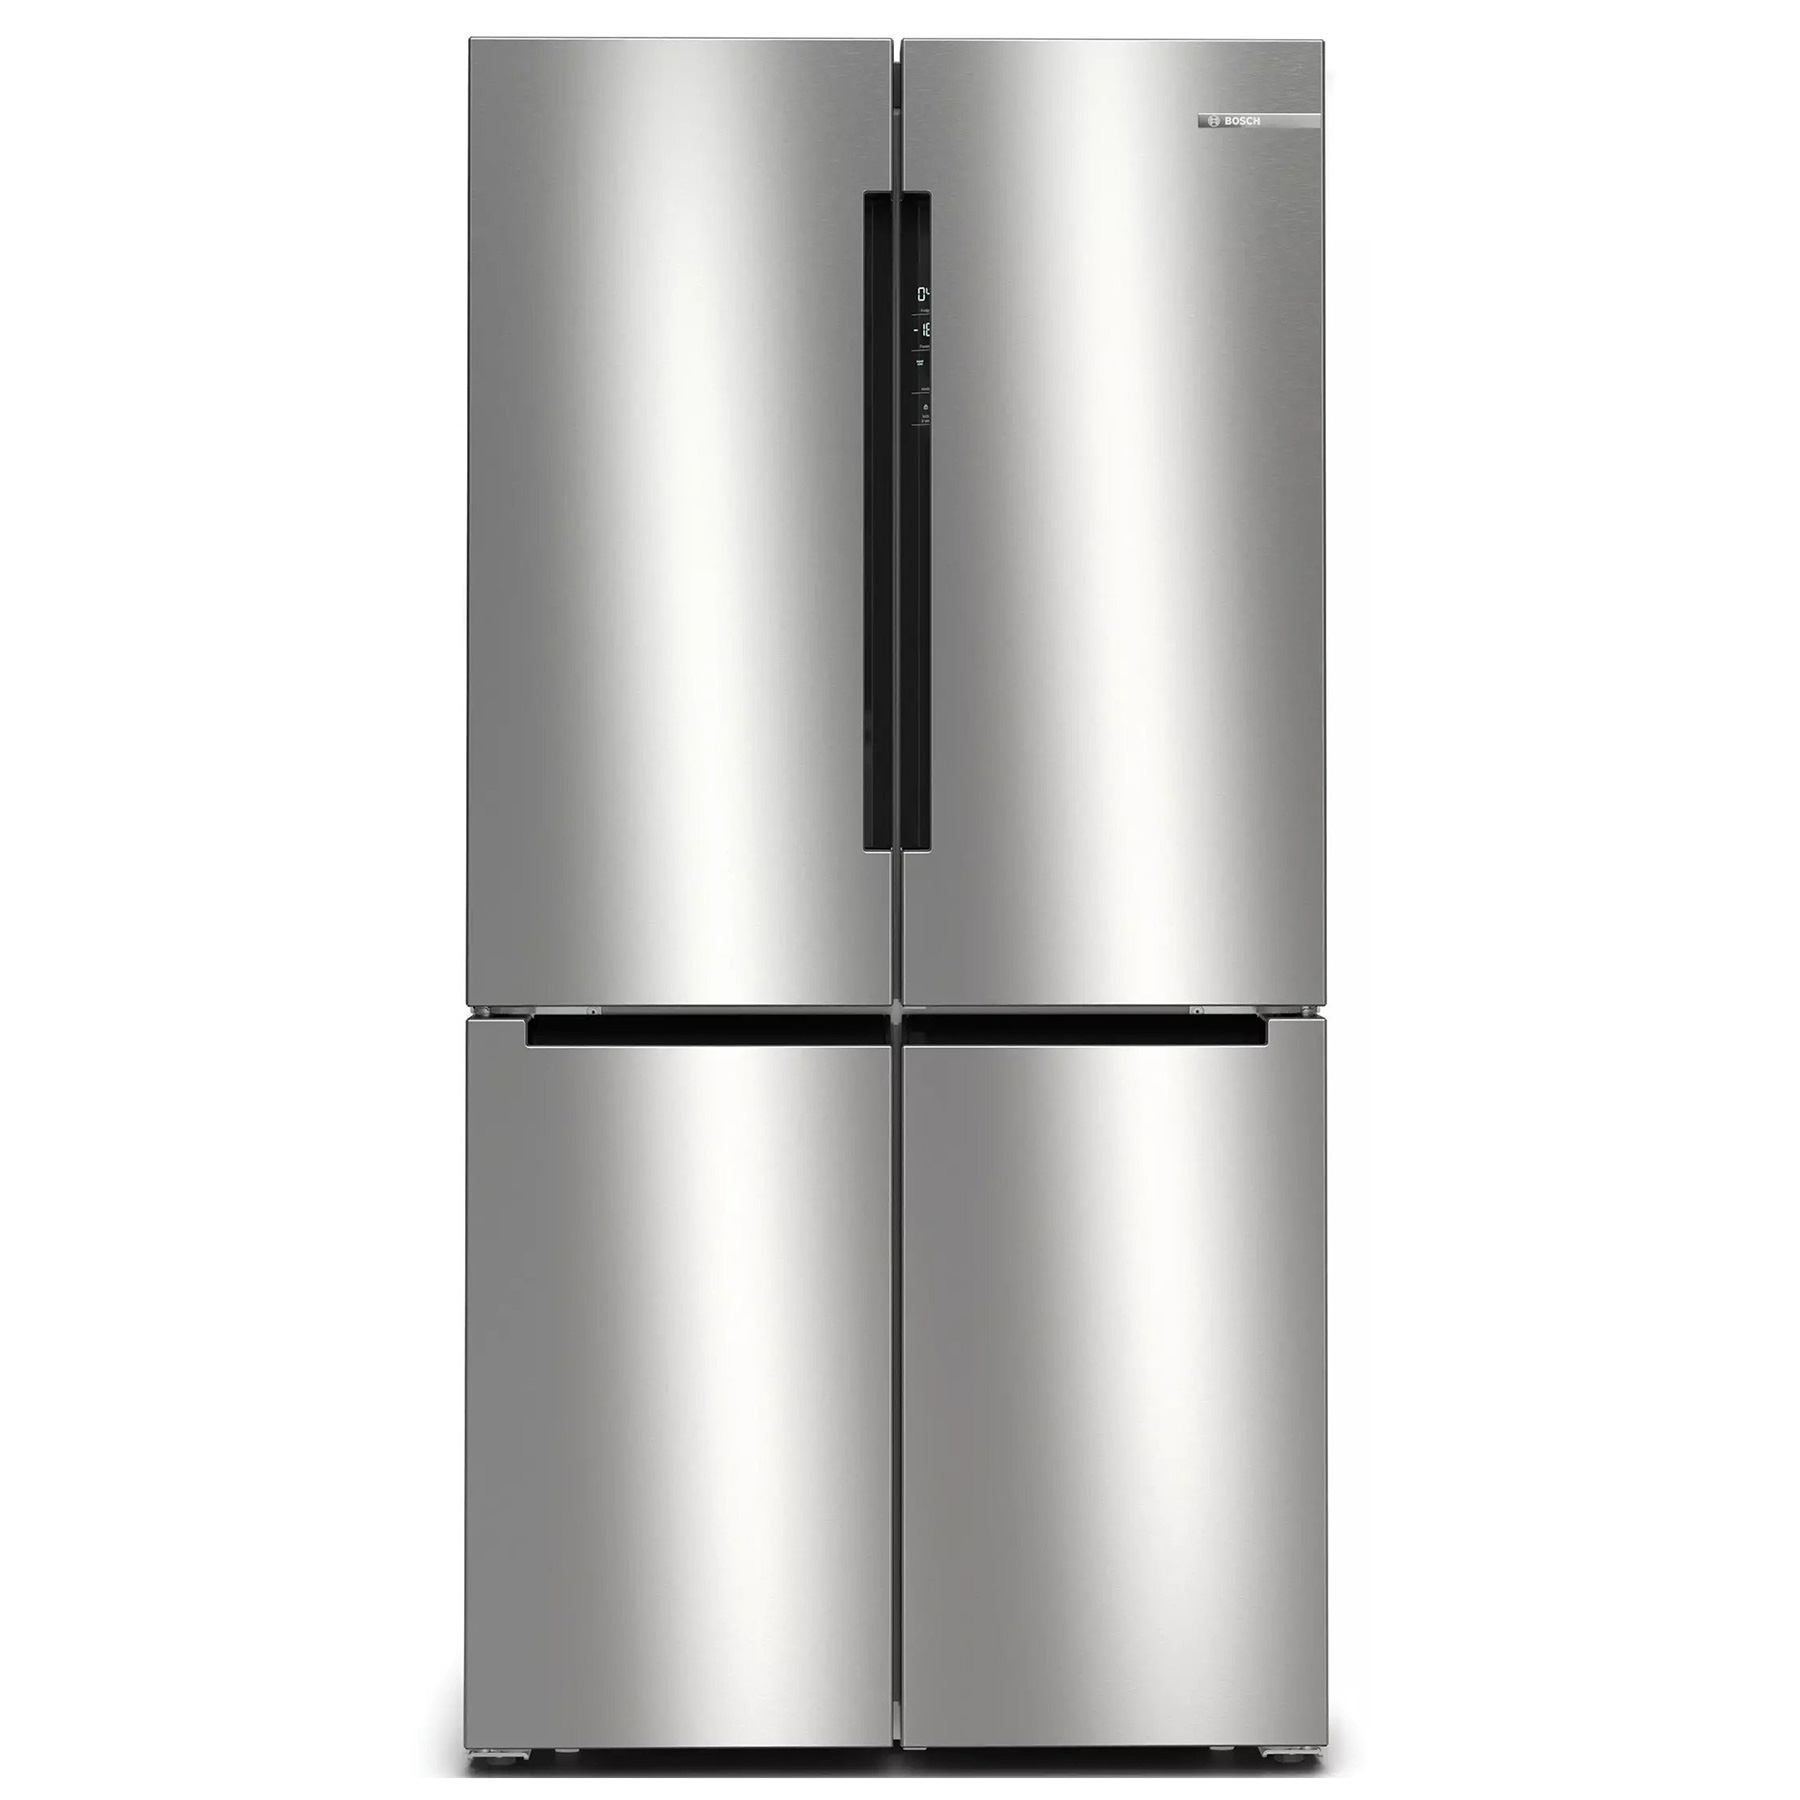 Image of Bosch KFN96VPEAG Series 4 American Fridge Freezer St St Inox E Rated